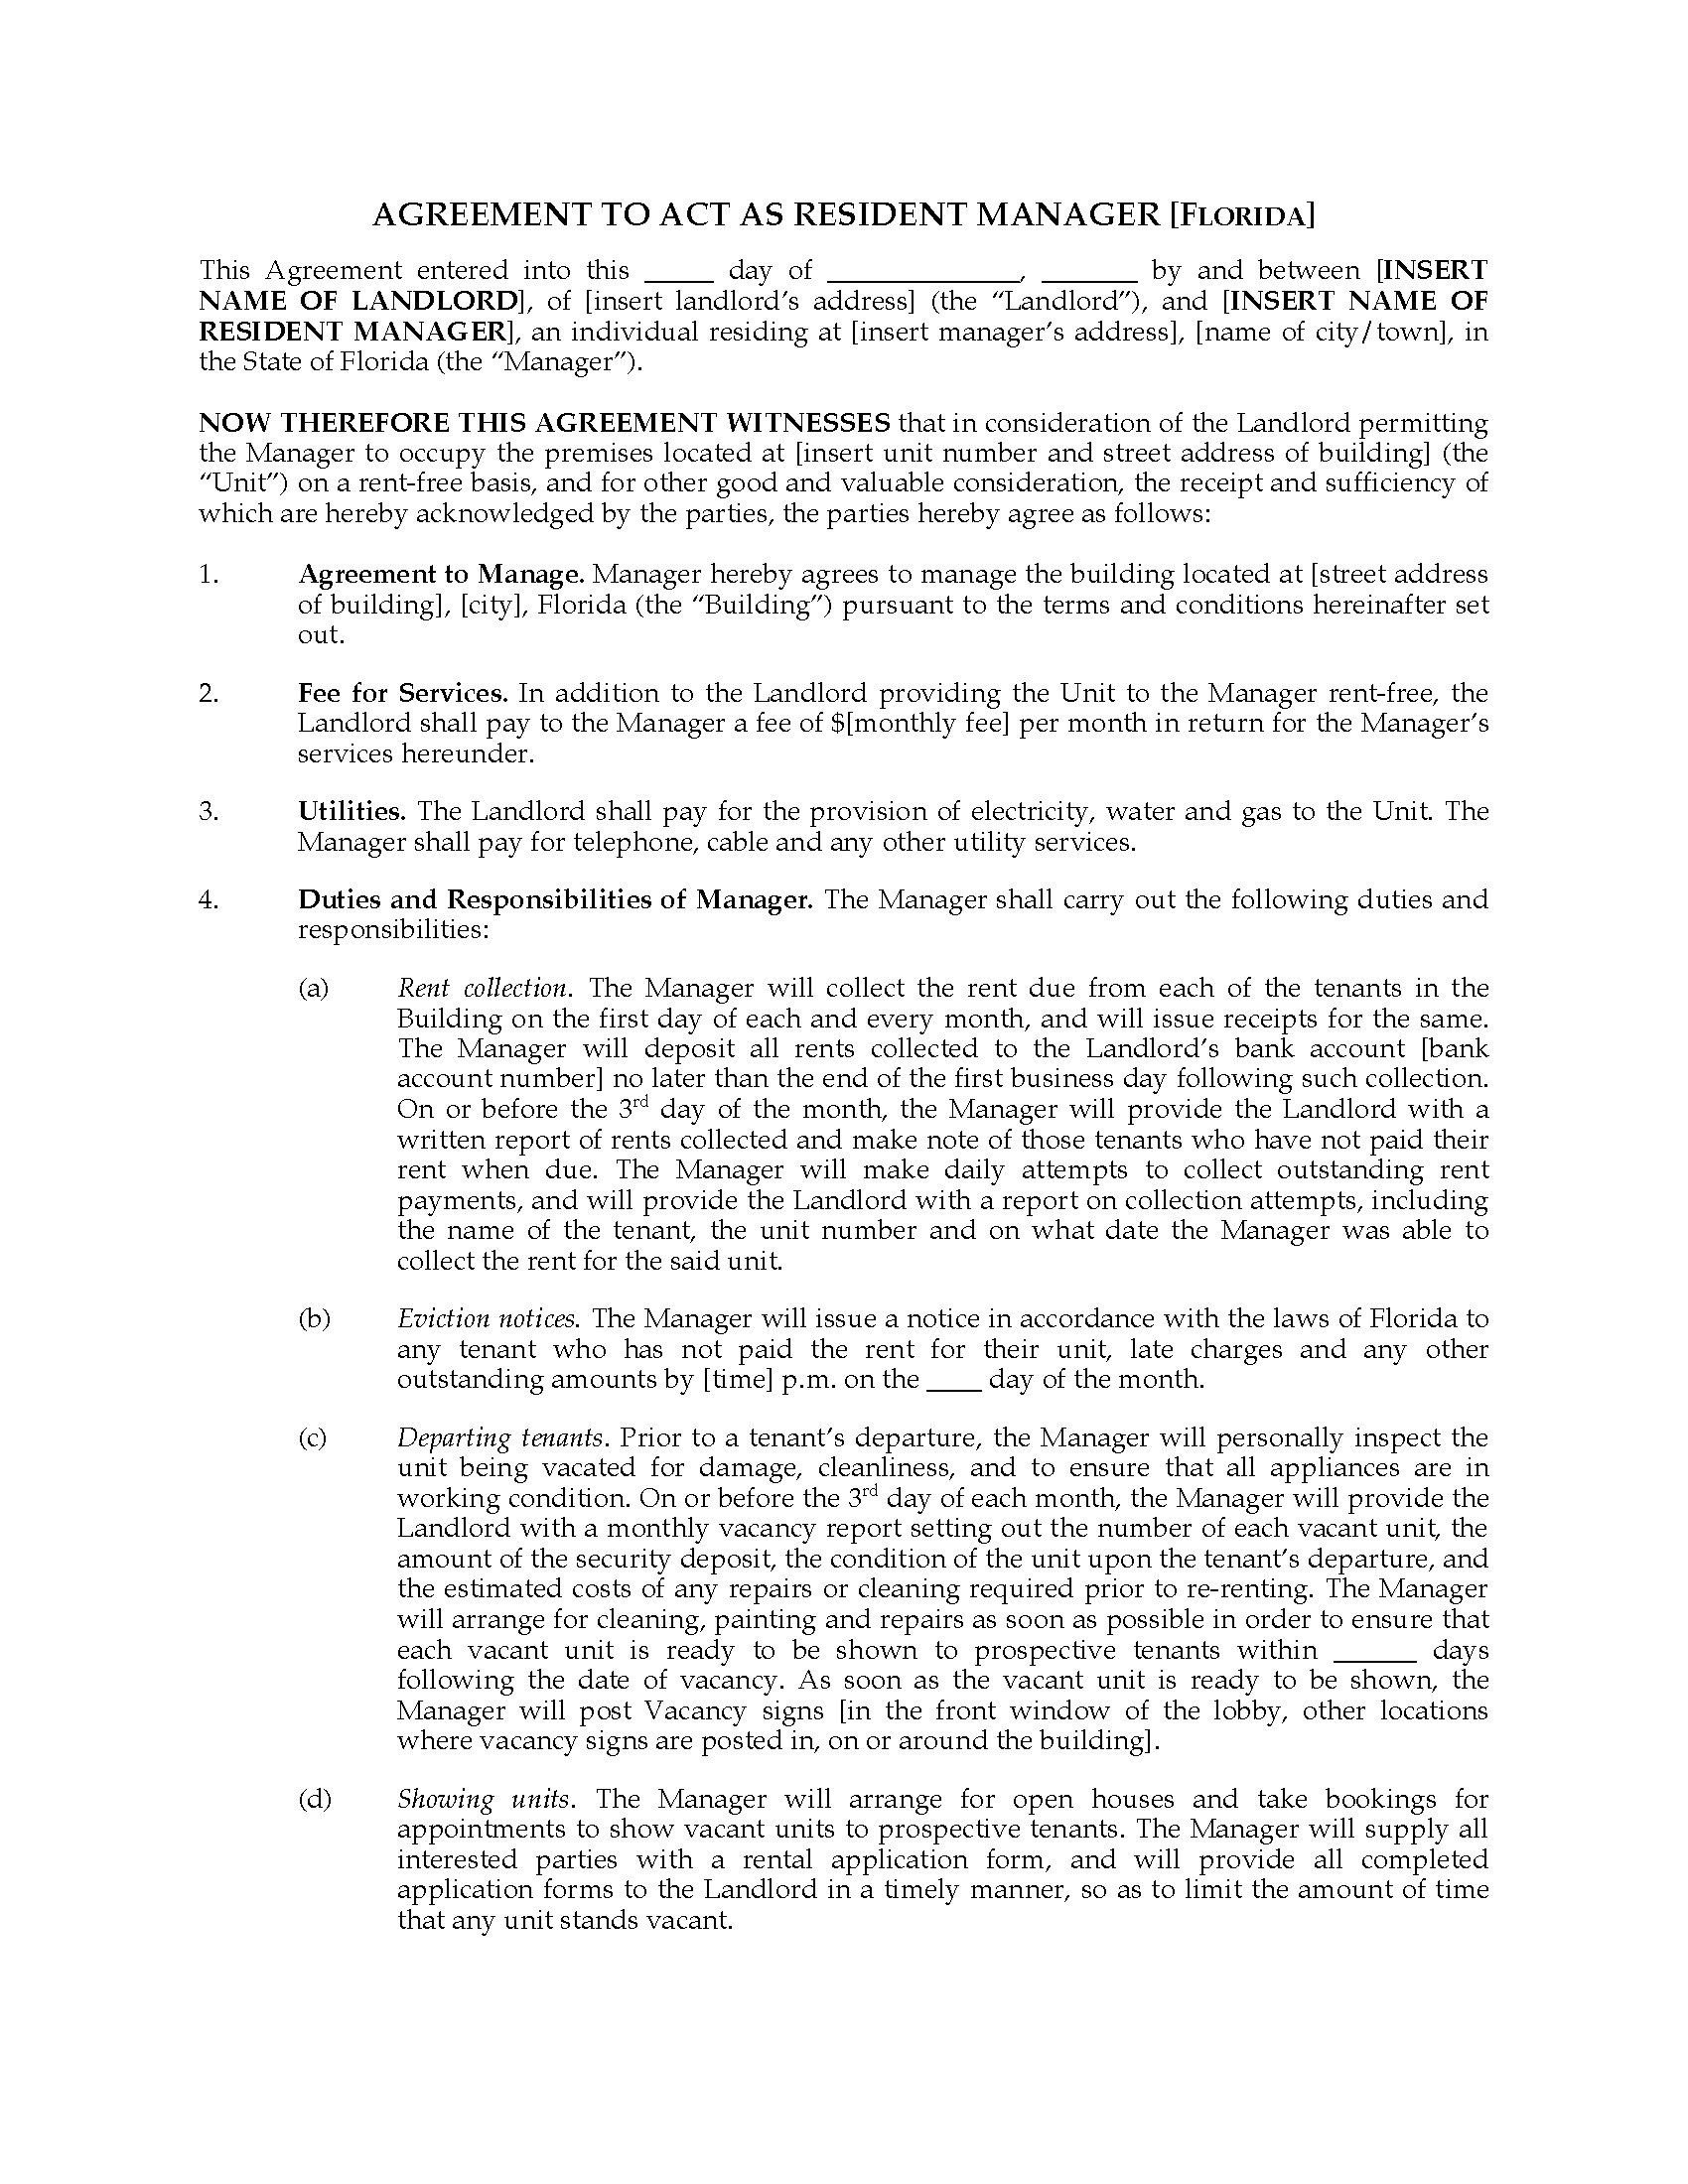 florida-resident-manager-agreement-legal-forms-and-business-templates